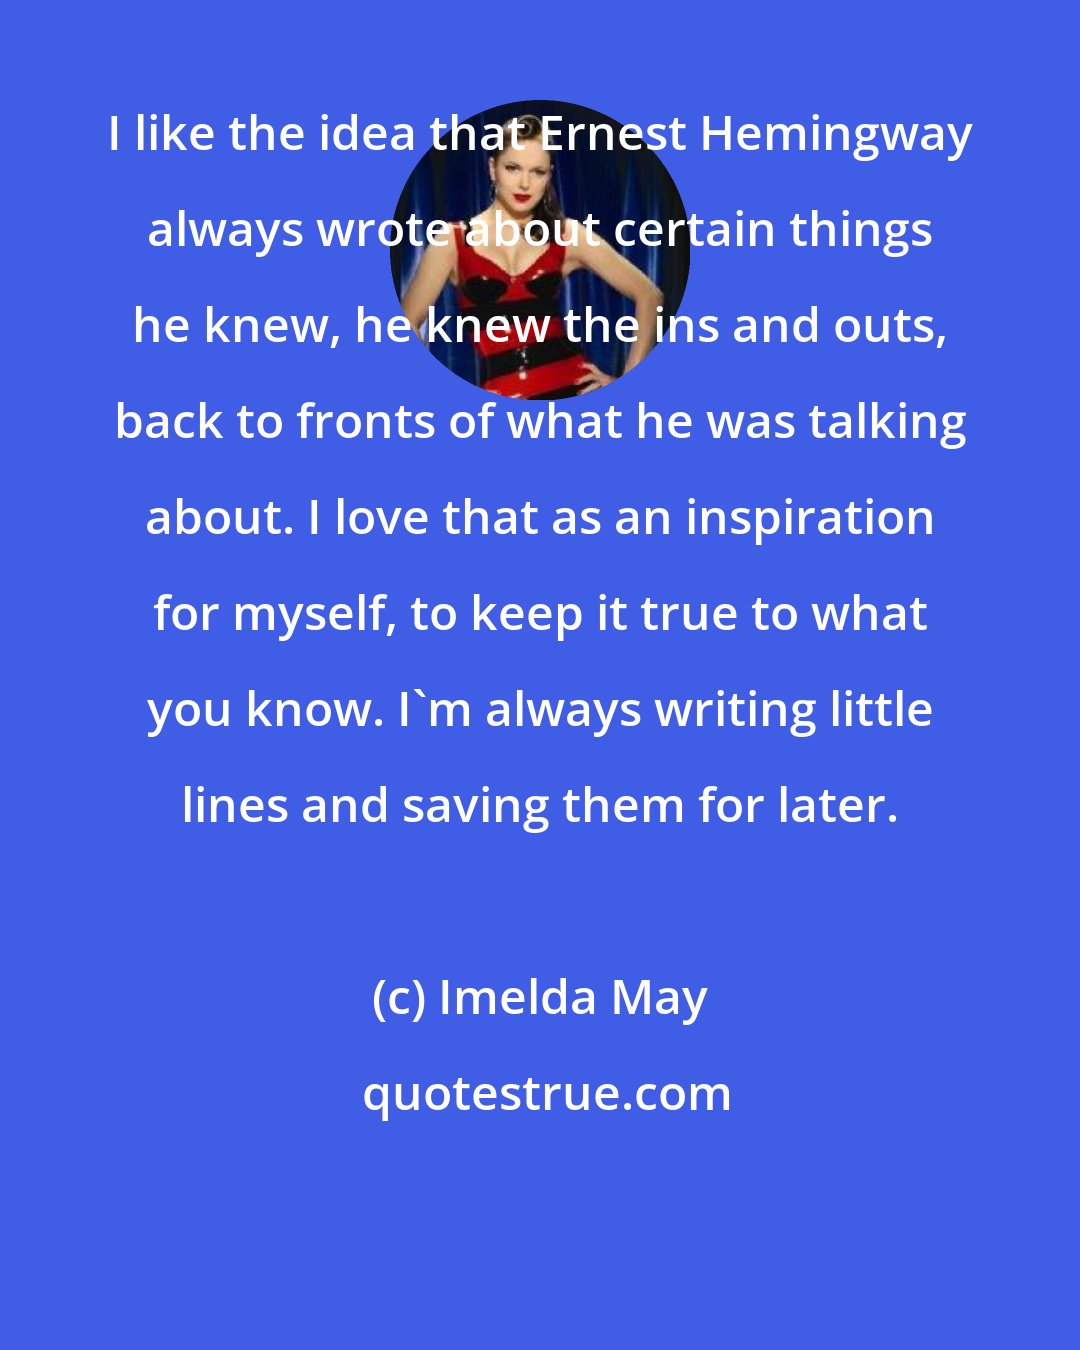 Imelda May: I like the idea that Ernest Hemingway always wrote about certain things he knew, he knew the ins and outs, back to fronts of what he was talking about. I love that as an inspiration for myself, to keep it true to what you know. I'm always writing little lines and saving them for later.